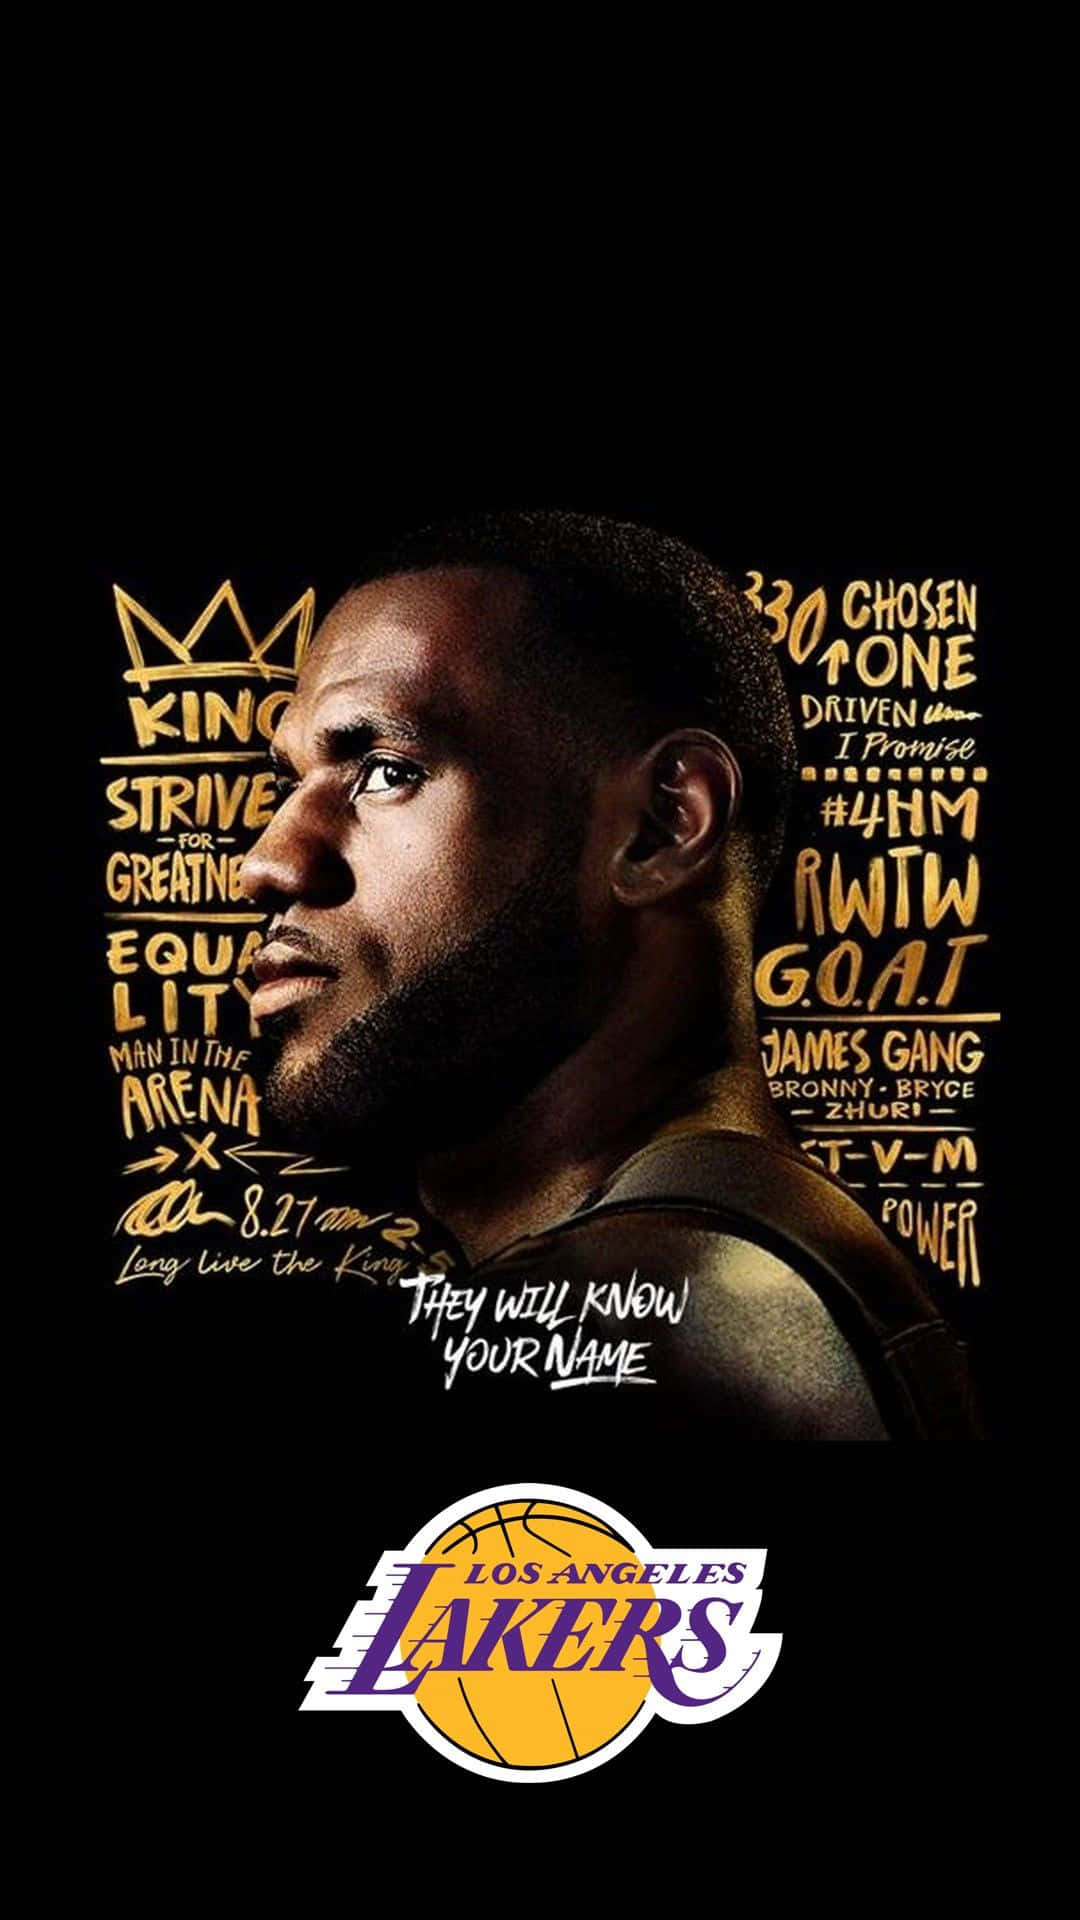 Get This Season’s Signature Look with the Lebron James iPhone Wallpaper